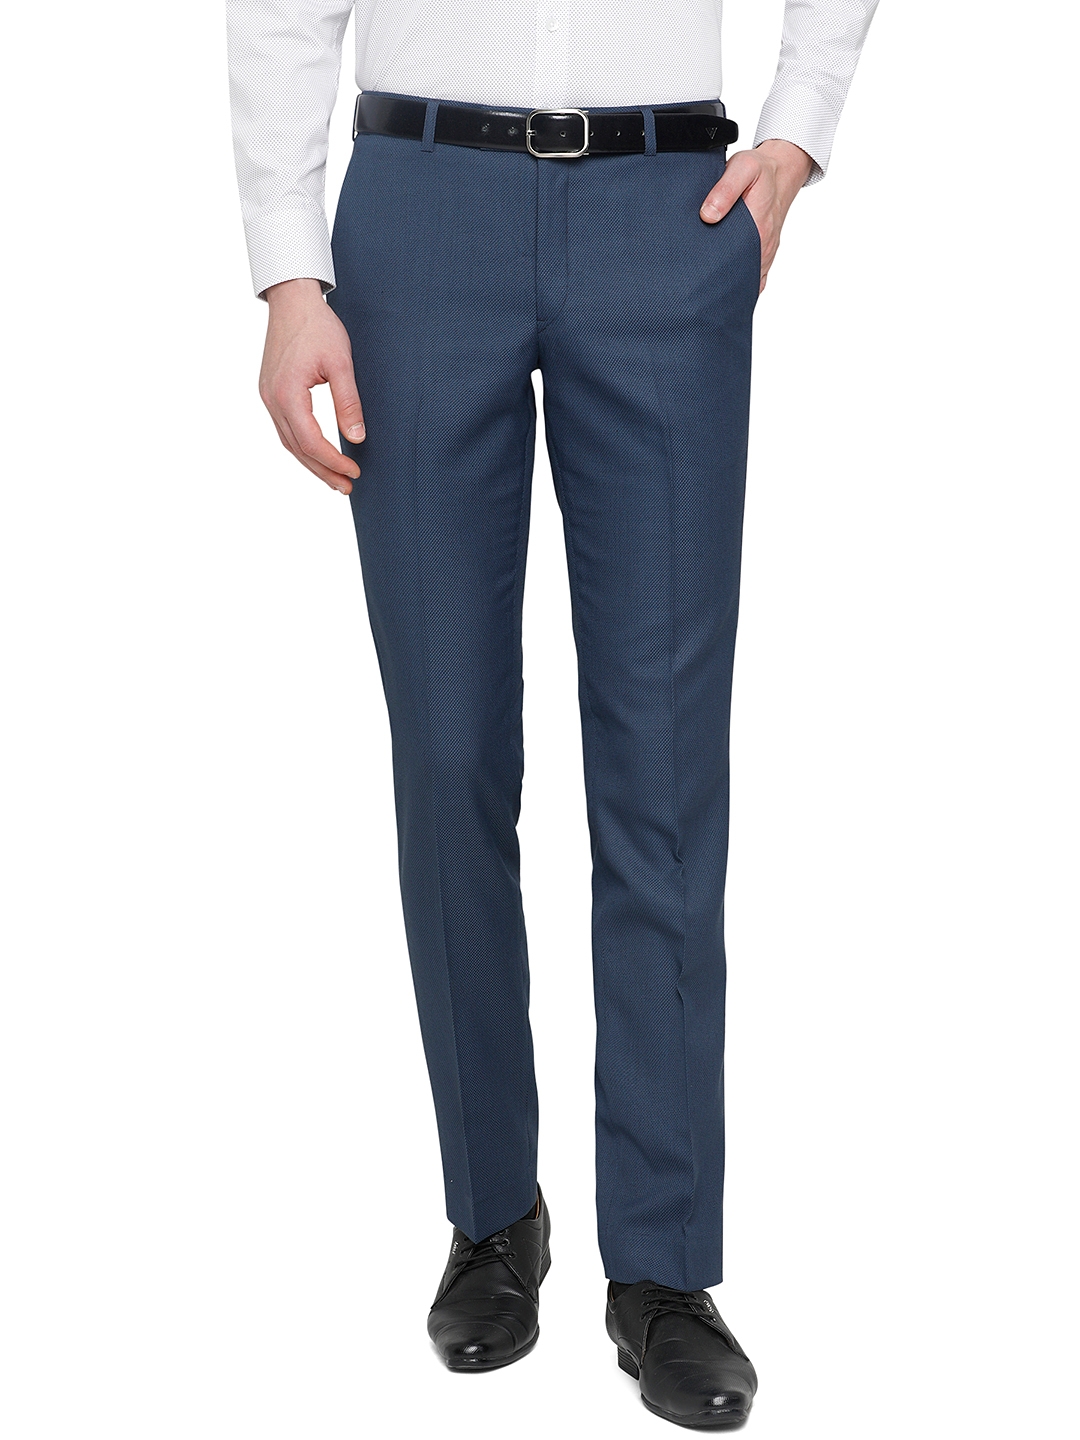 Greenfibre | Navy Blue Solid Slim Fit Formal Trouser | Greenfibre